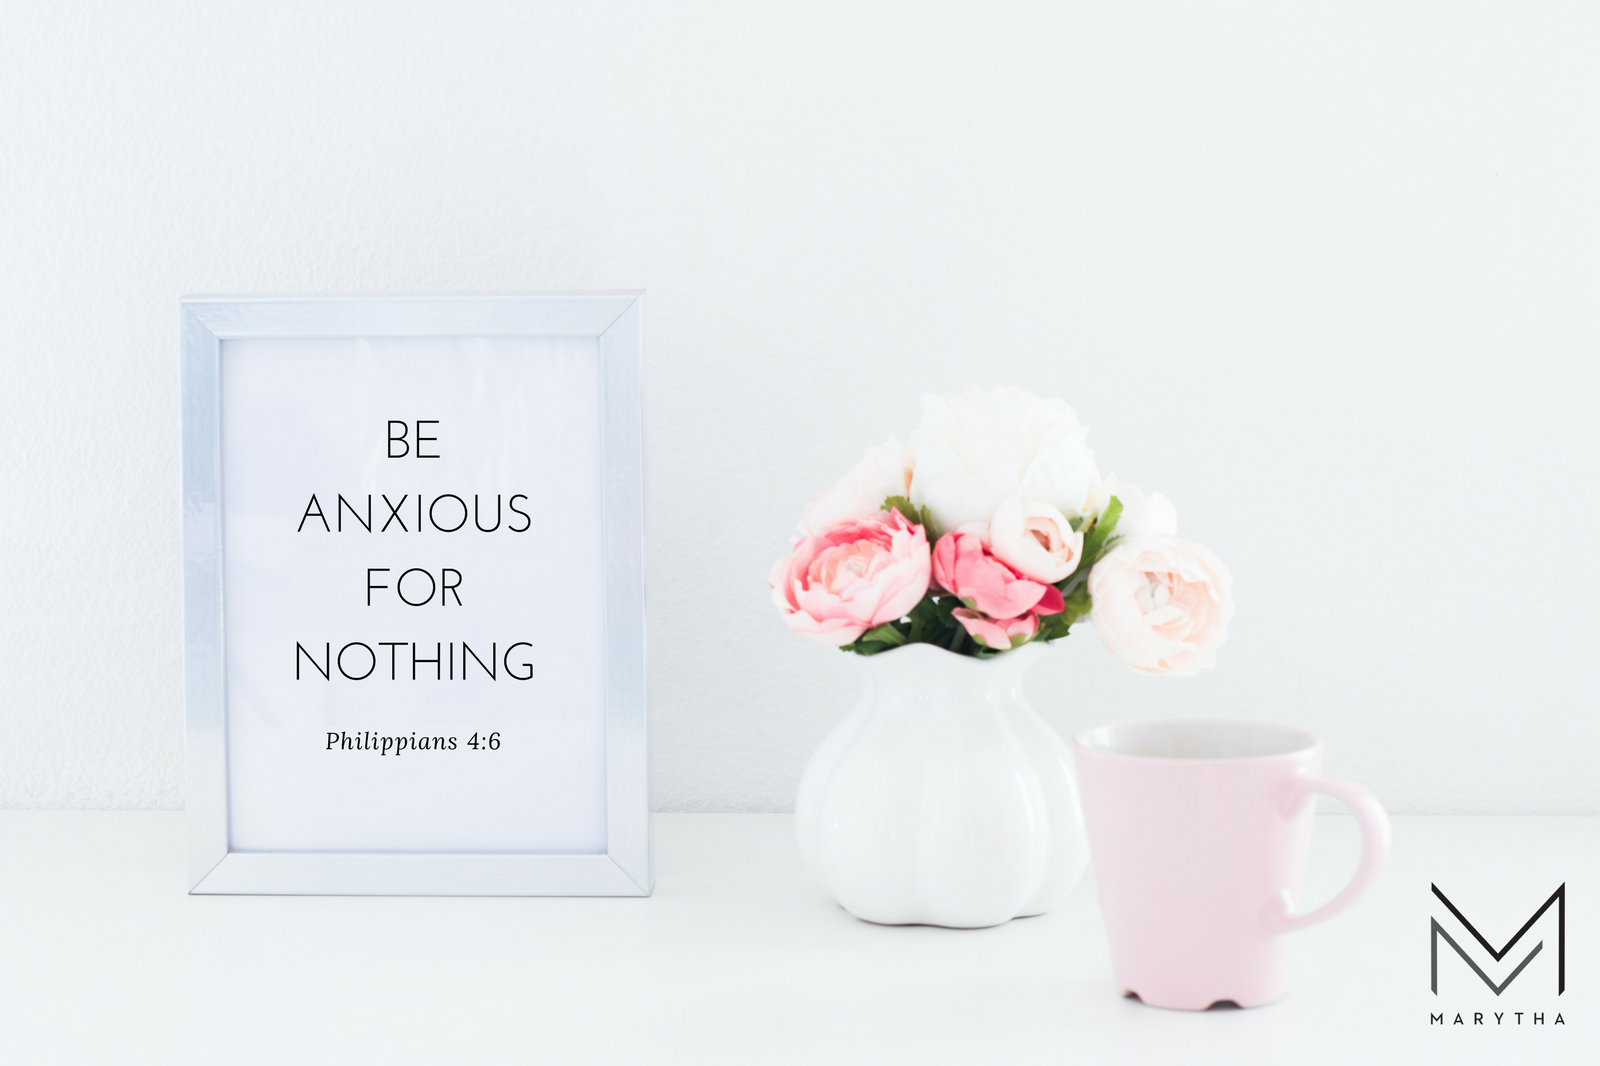 be anxious for nothing philippians 4:6